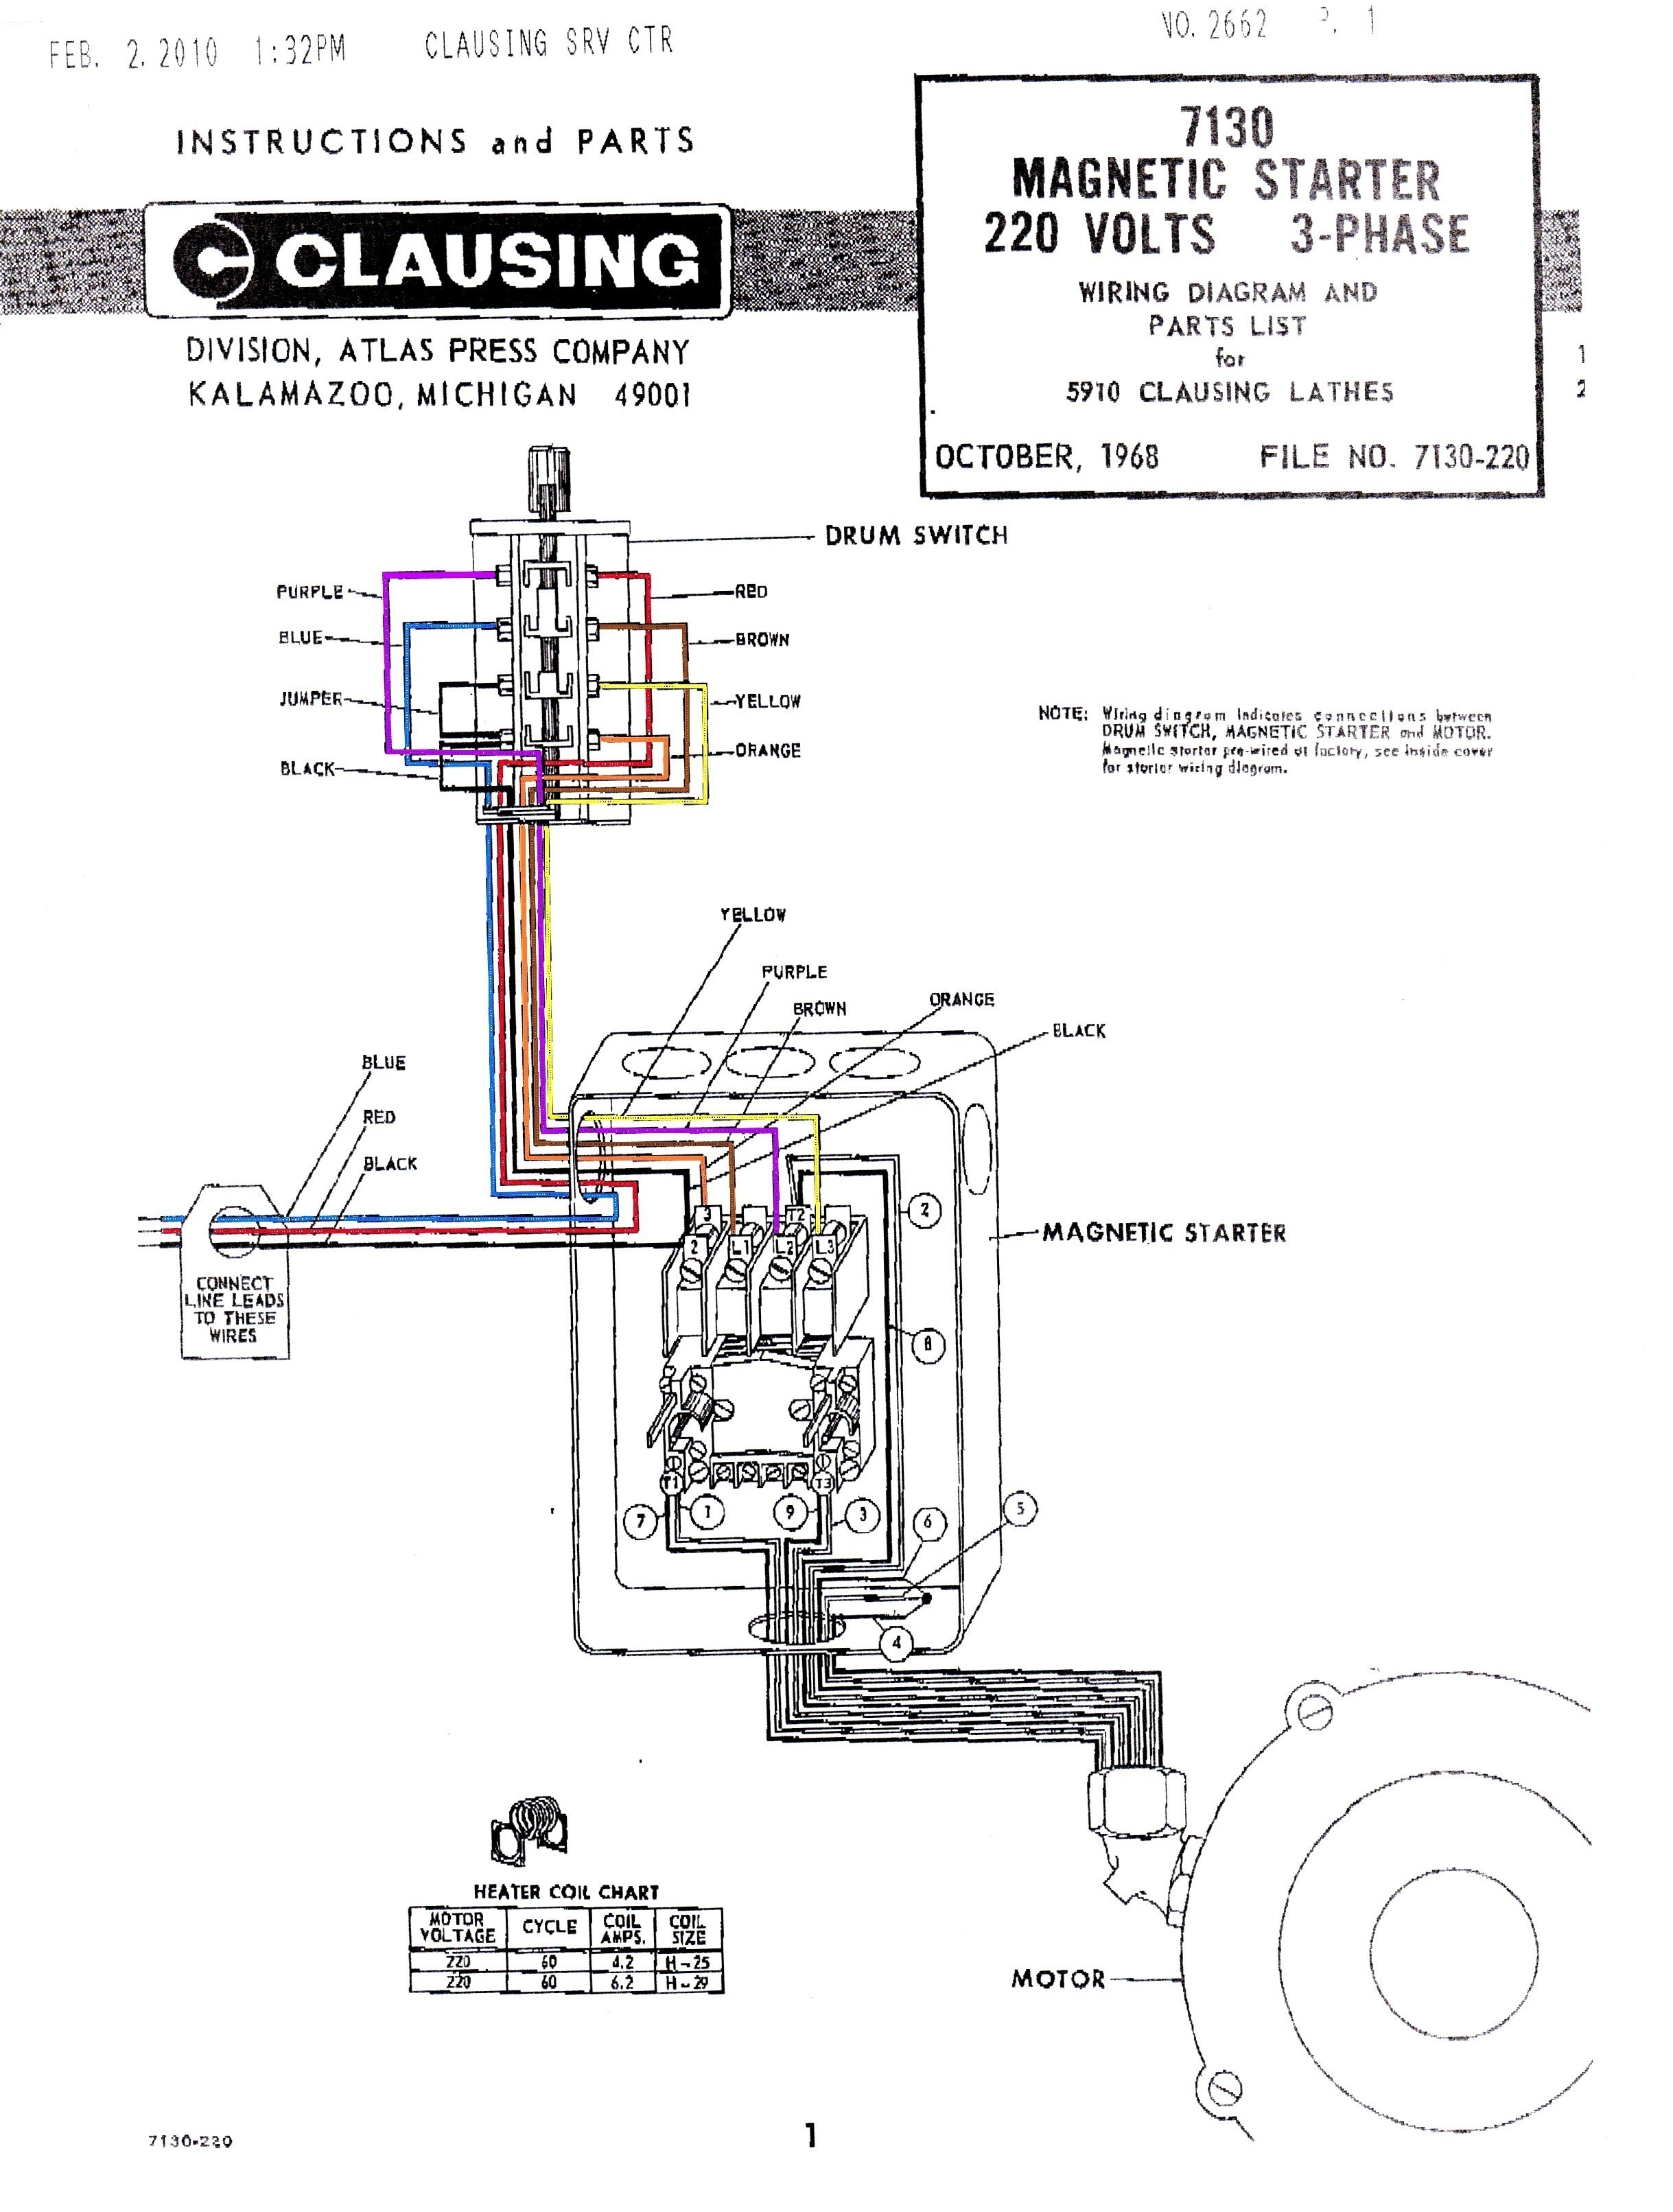 Siemens Dol Starter Wiring Diagram Refrence Single Phase Wiring Diagrams Motor Repalcement Parts and Diagram